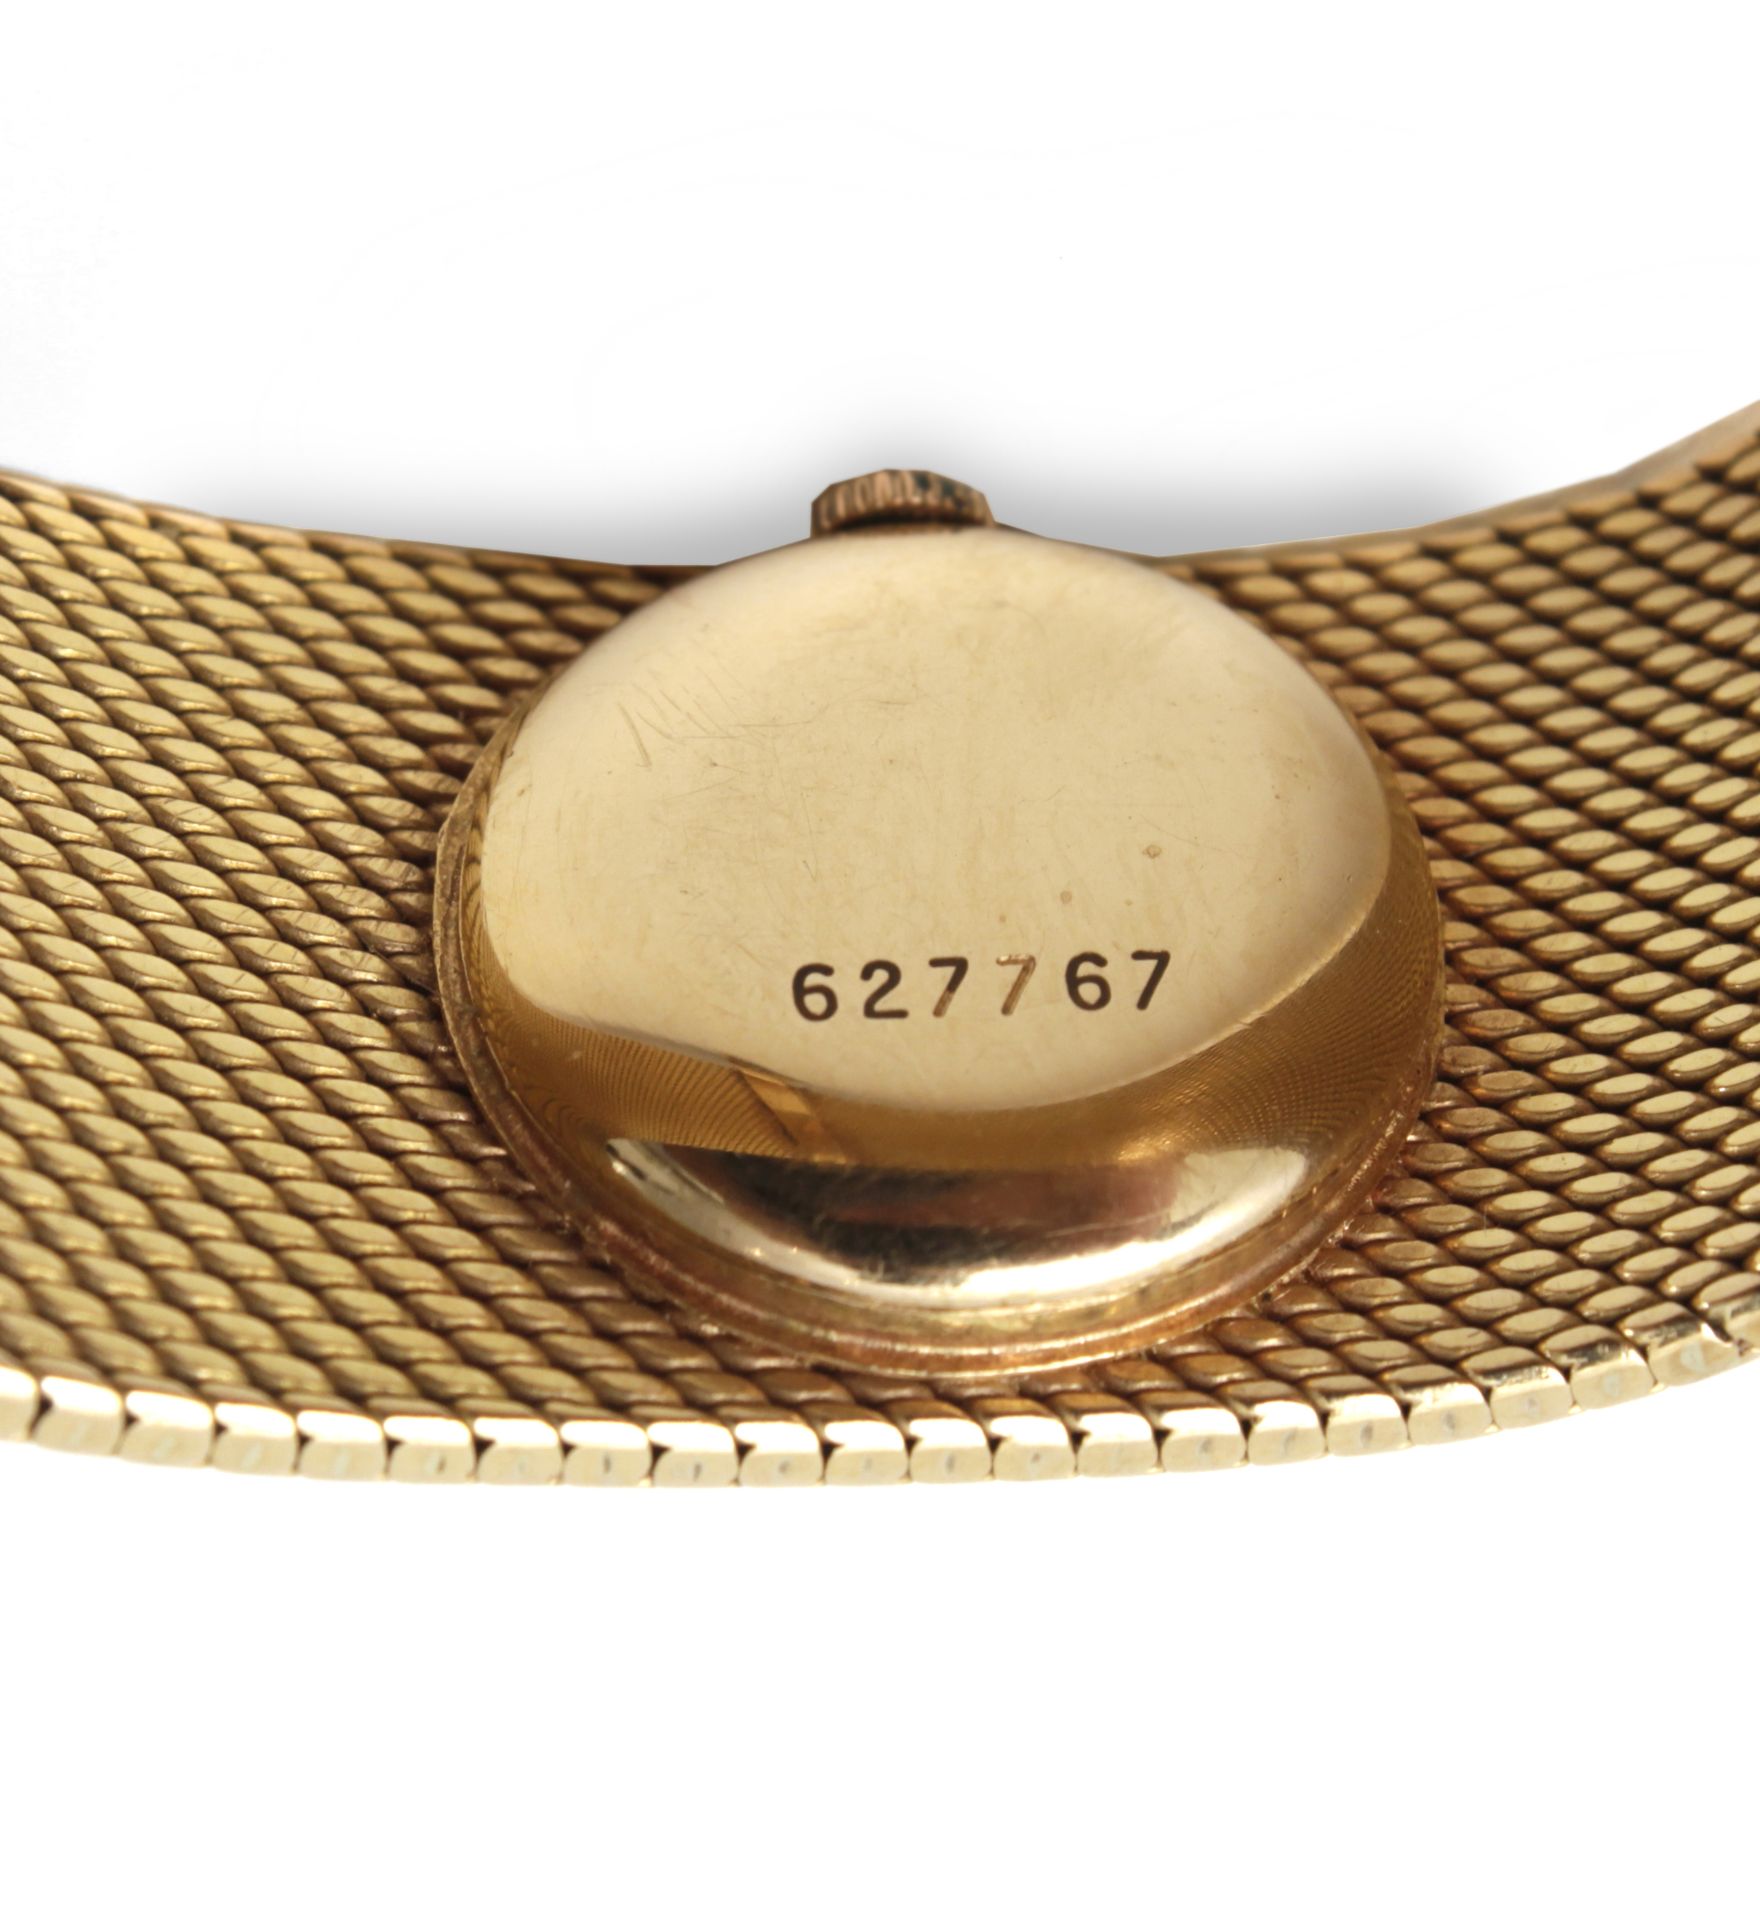 Zenith A diamond and 18 k. yellow gold ladies watch - Image 4 of 4